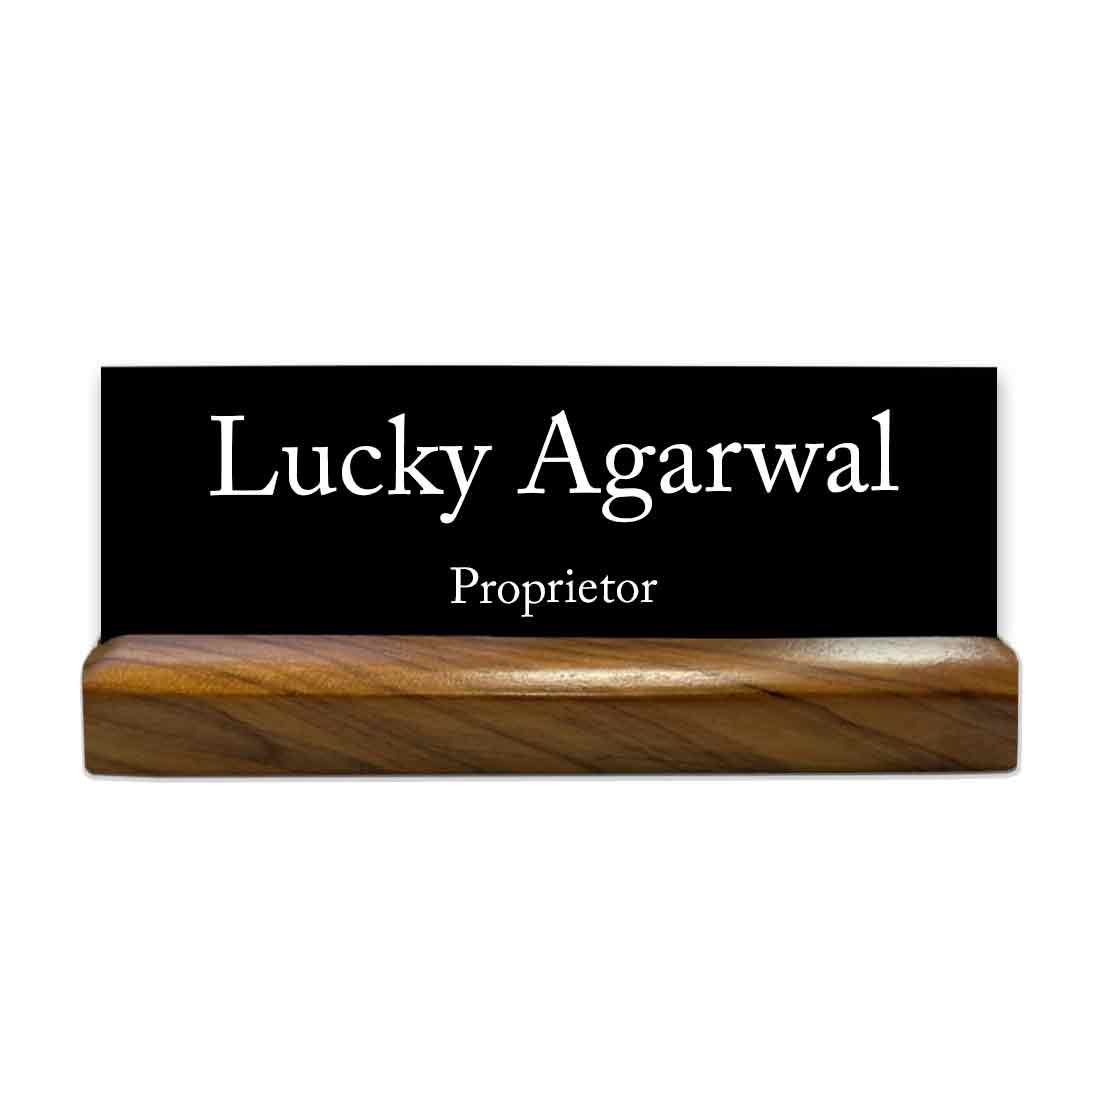 Personalized Table Name Plate Wooden for Office Desk - Add Your Name